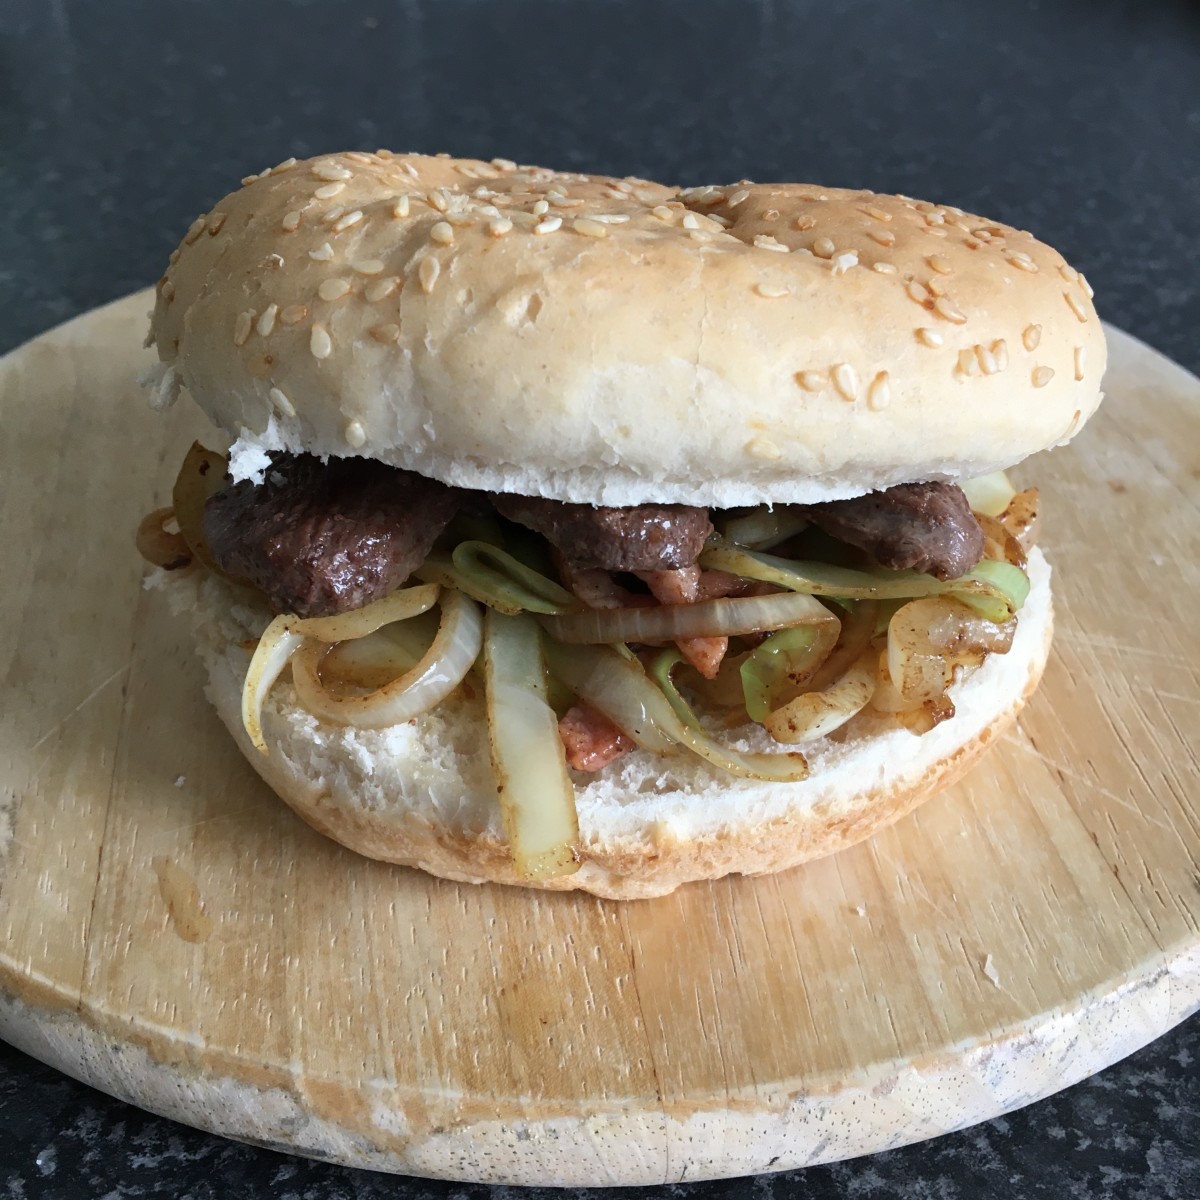 Wild goose on a bun with cabbage, bacon and onion